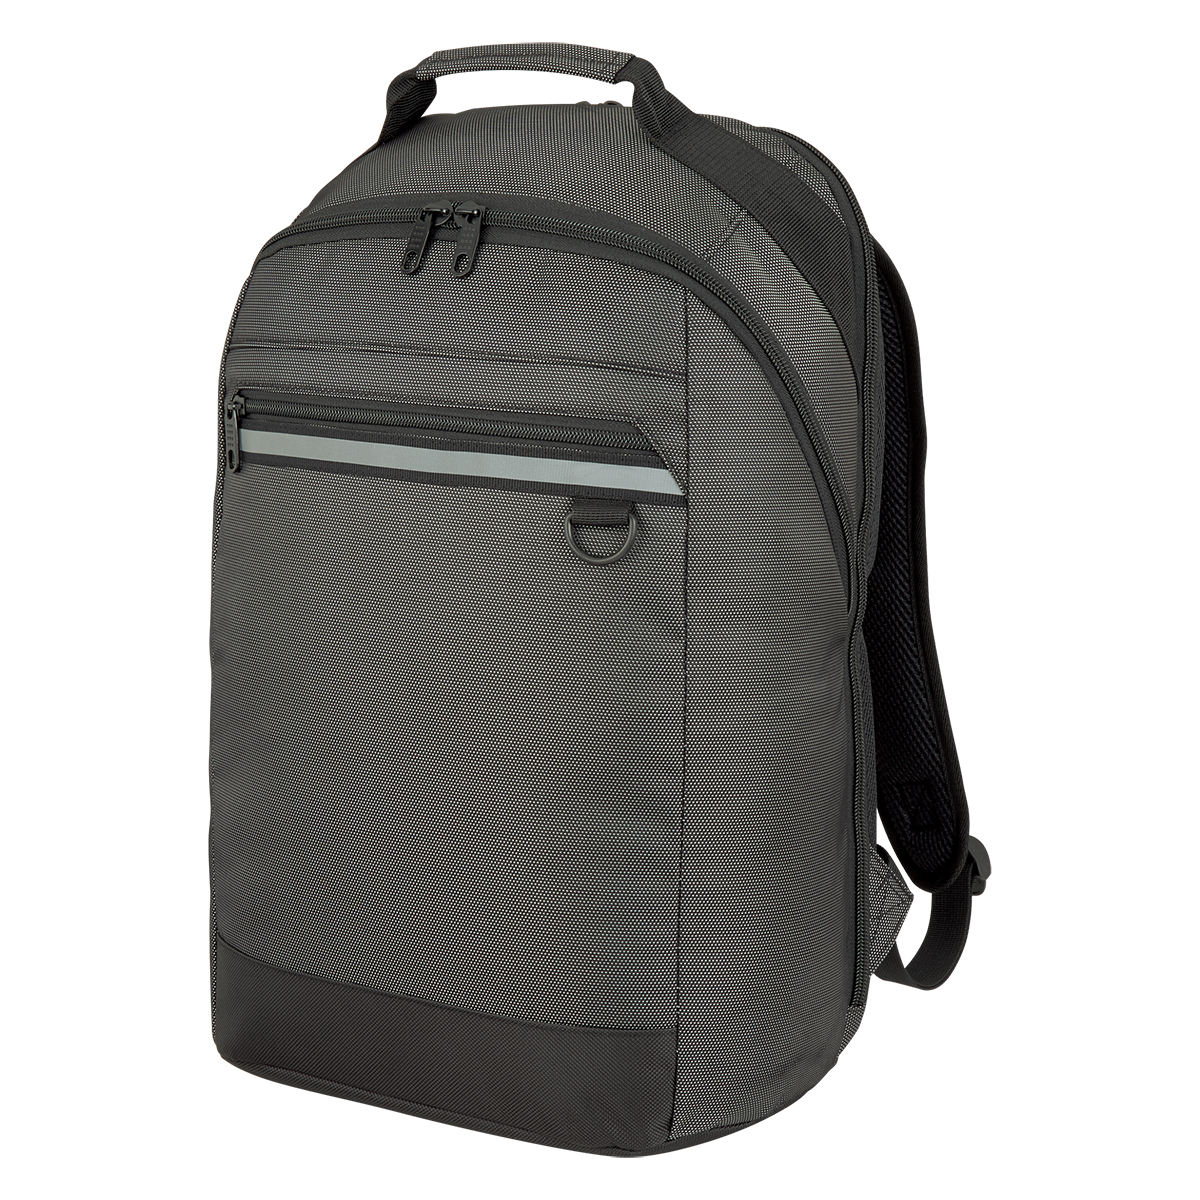 #3499 Emerson Reflective Accent Backpack - Hit Promotional Products